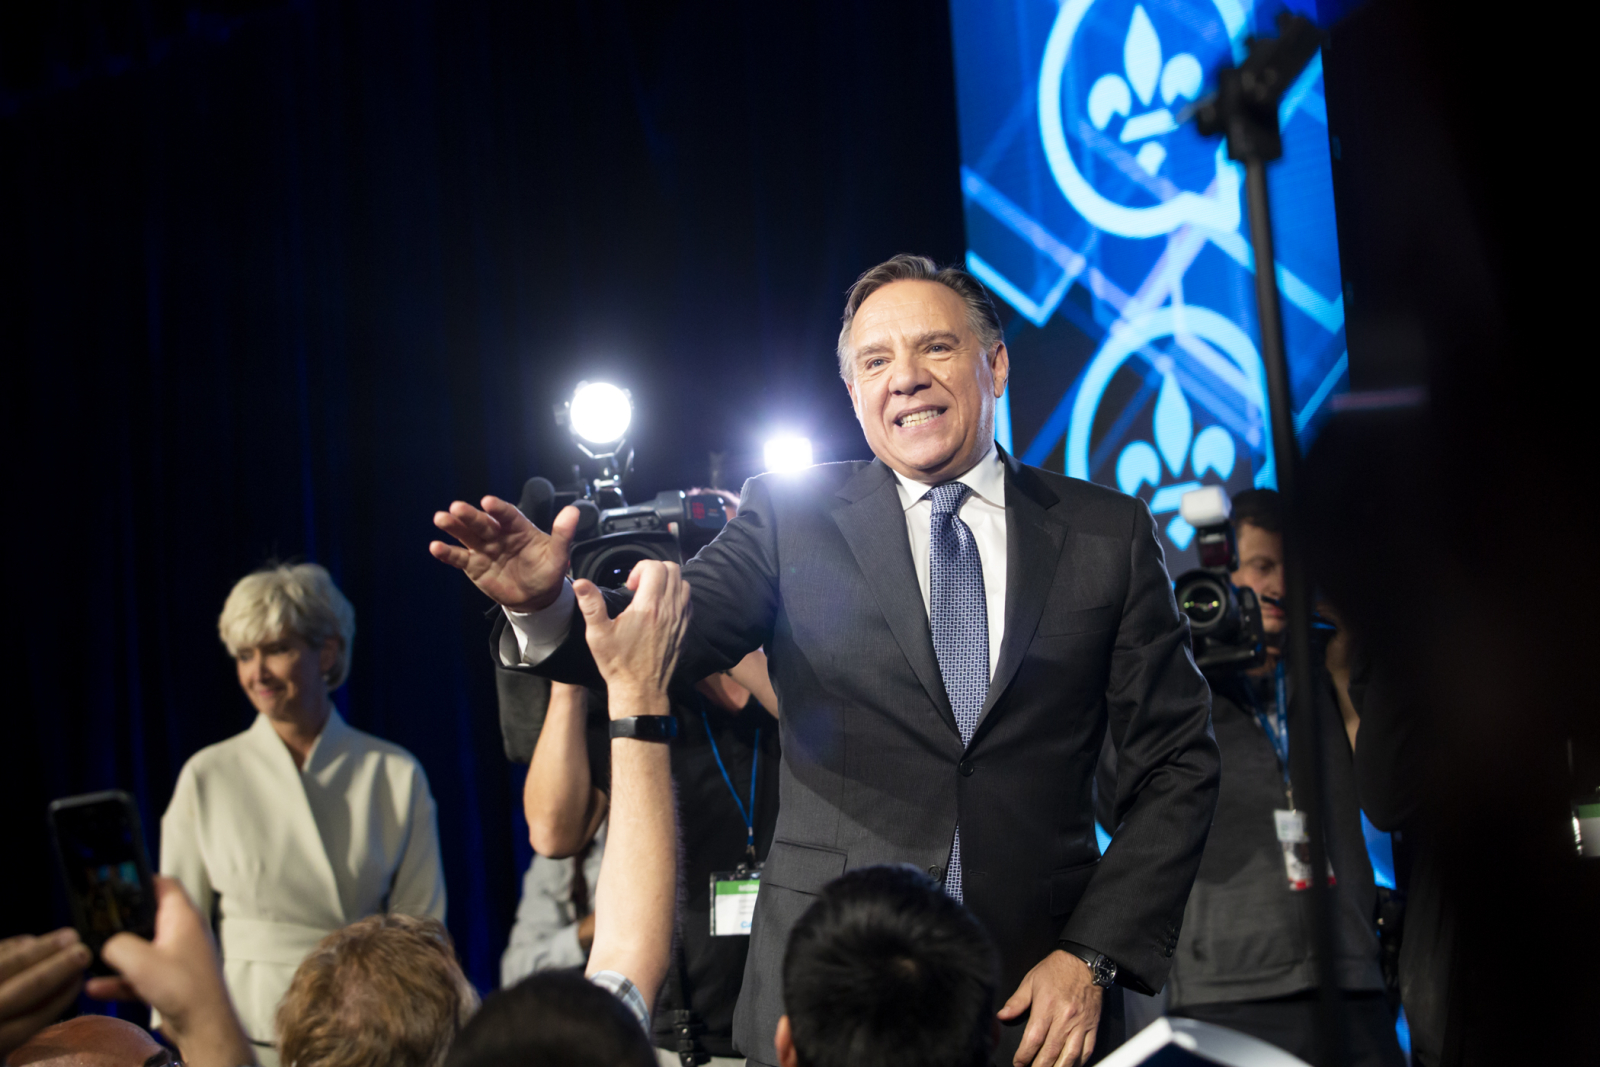 François Legault at CAQ election headquarters on election night, Oct. 2 2018